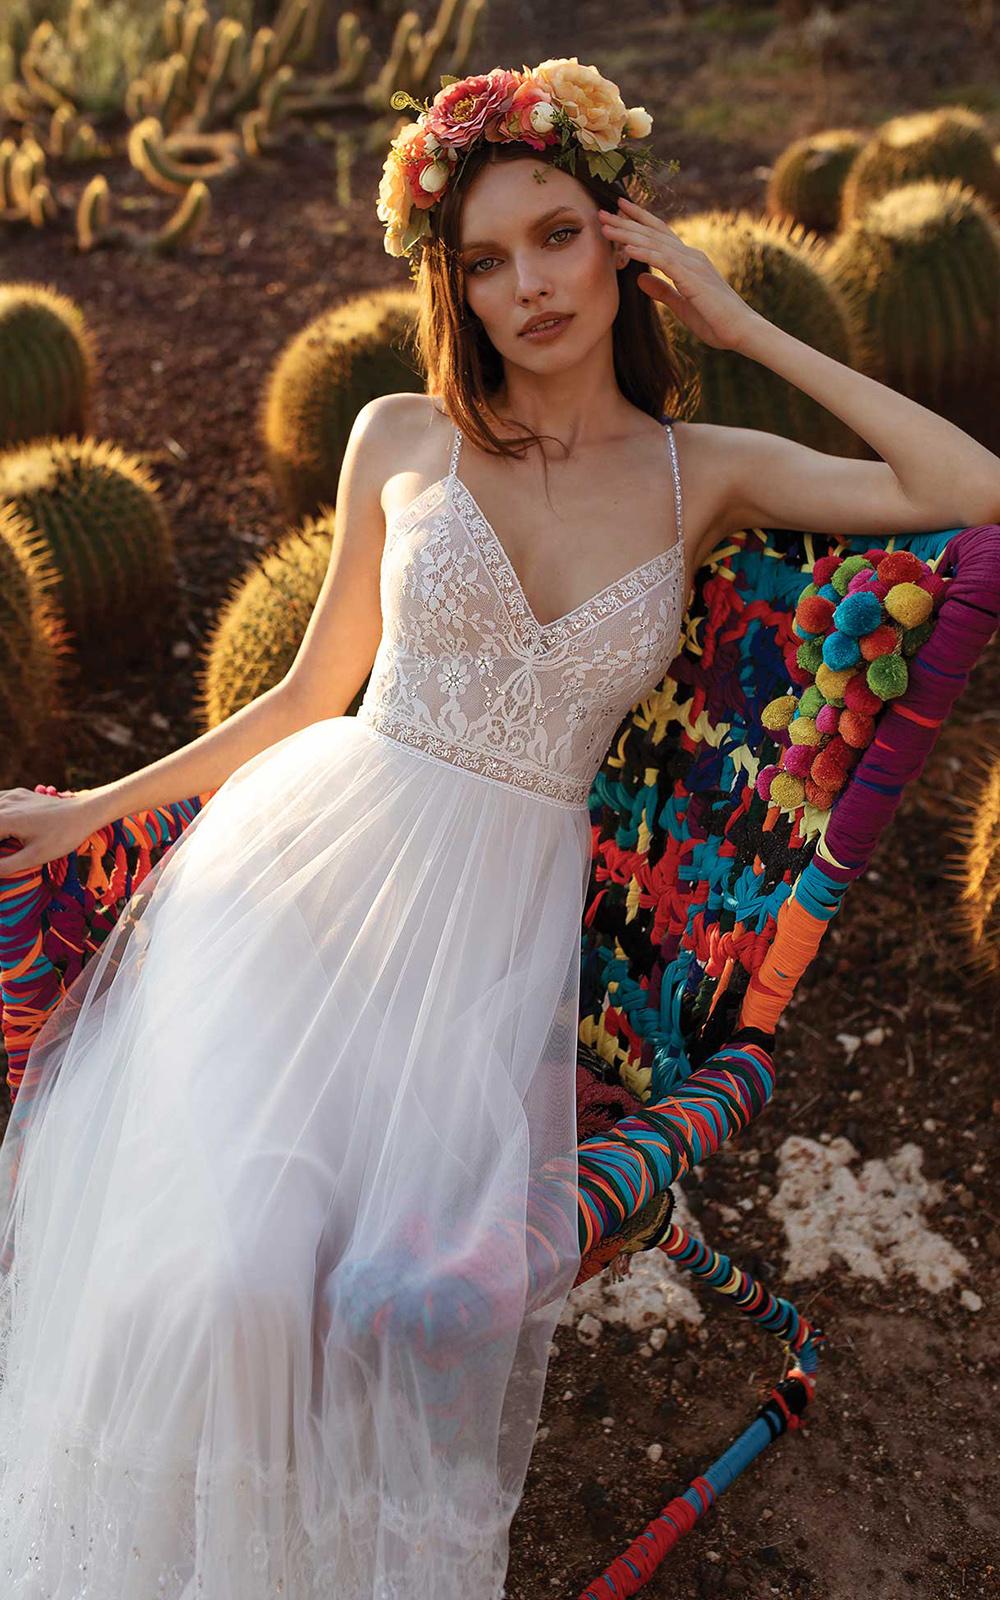 Rustic Wedding Dresses For Outdoor Party : 21 Styles+ Faqs